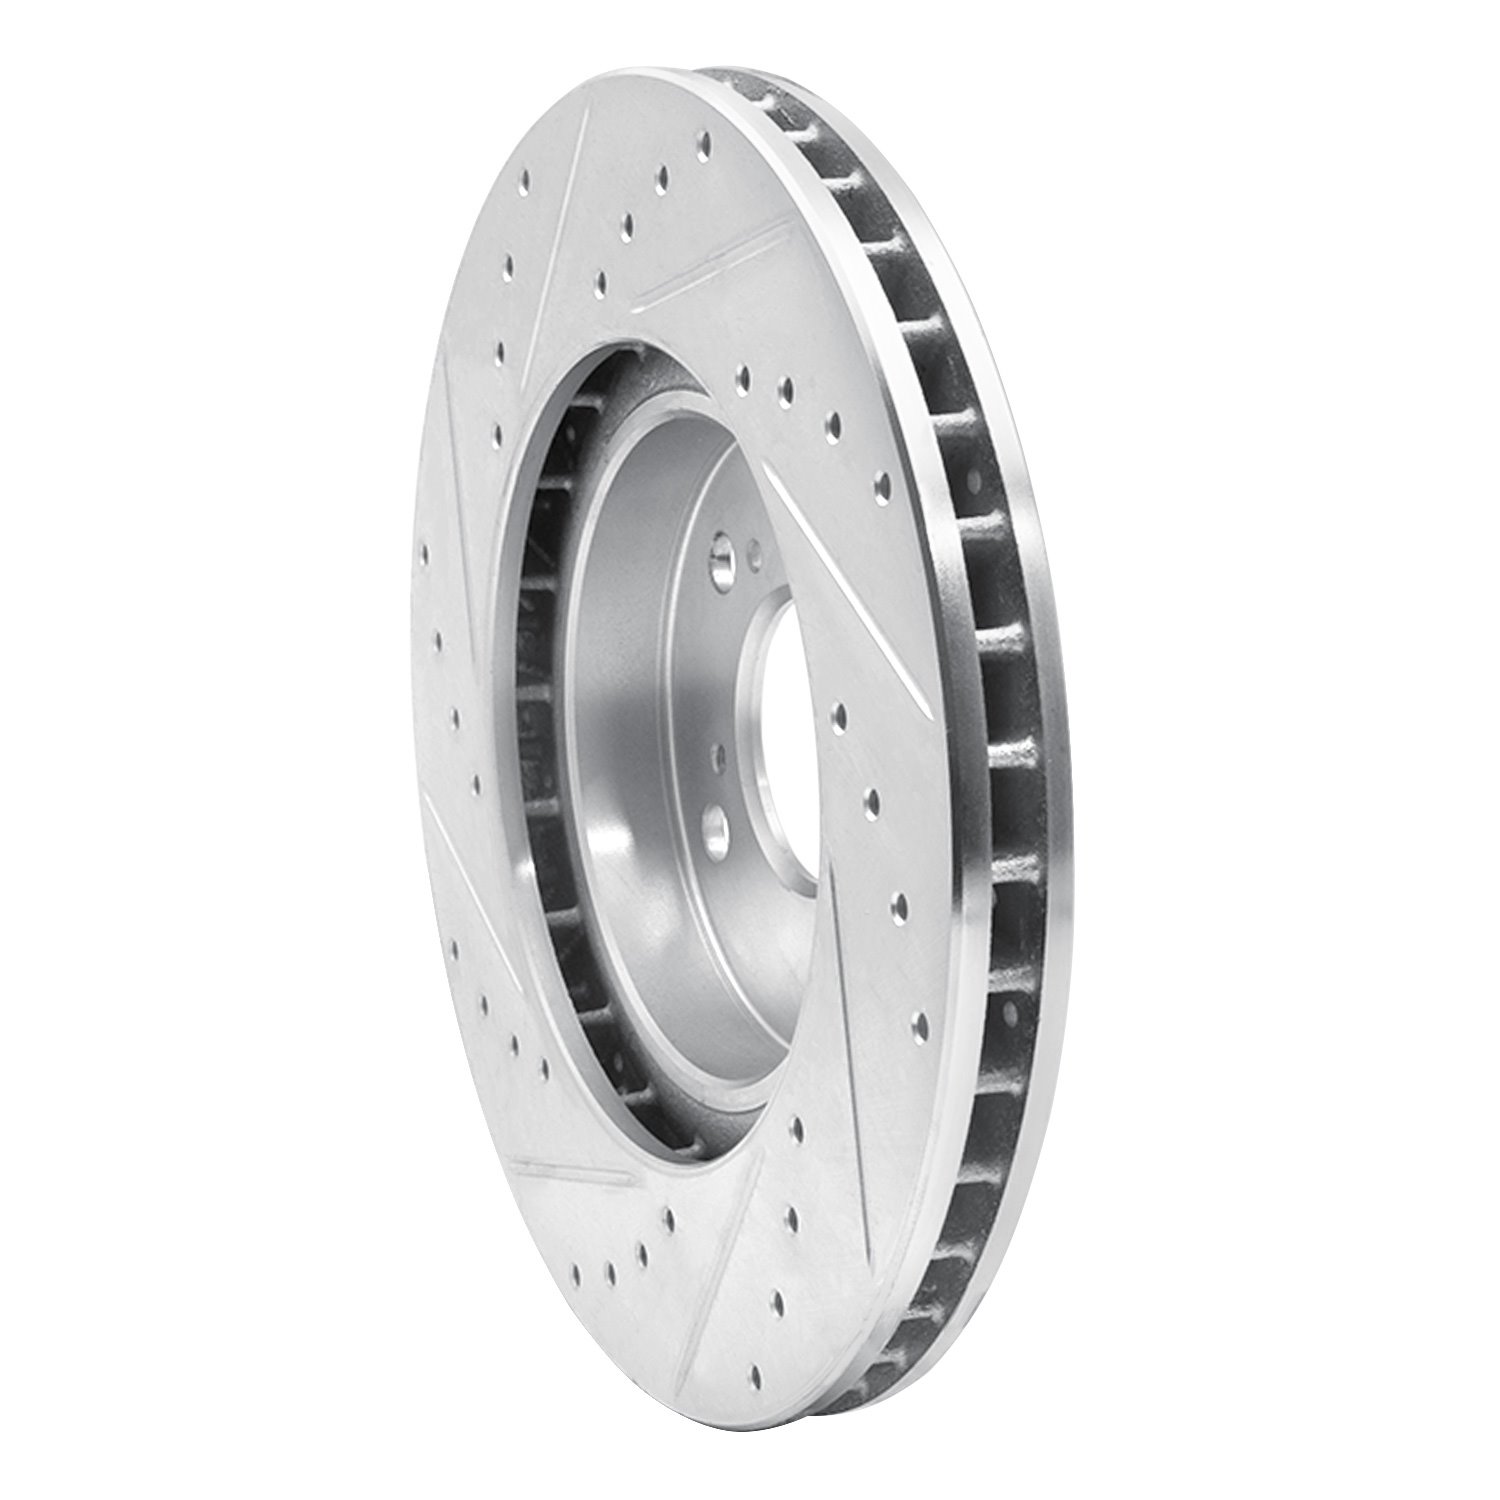 E-Line Drilled & Slotted Silver Brake Rotor, 2005-2012